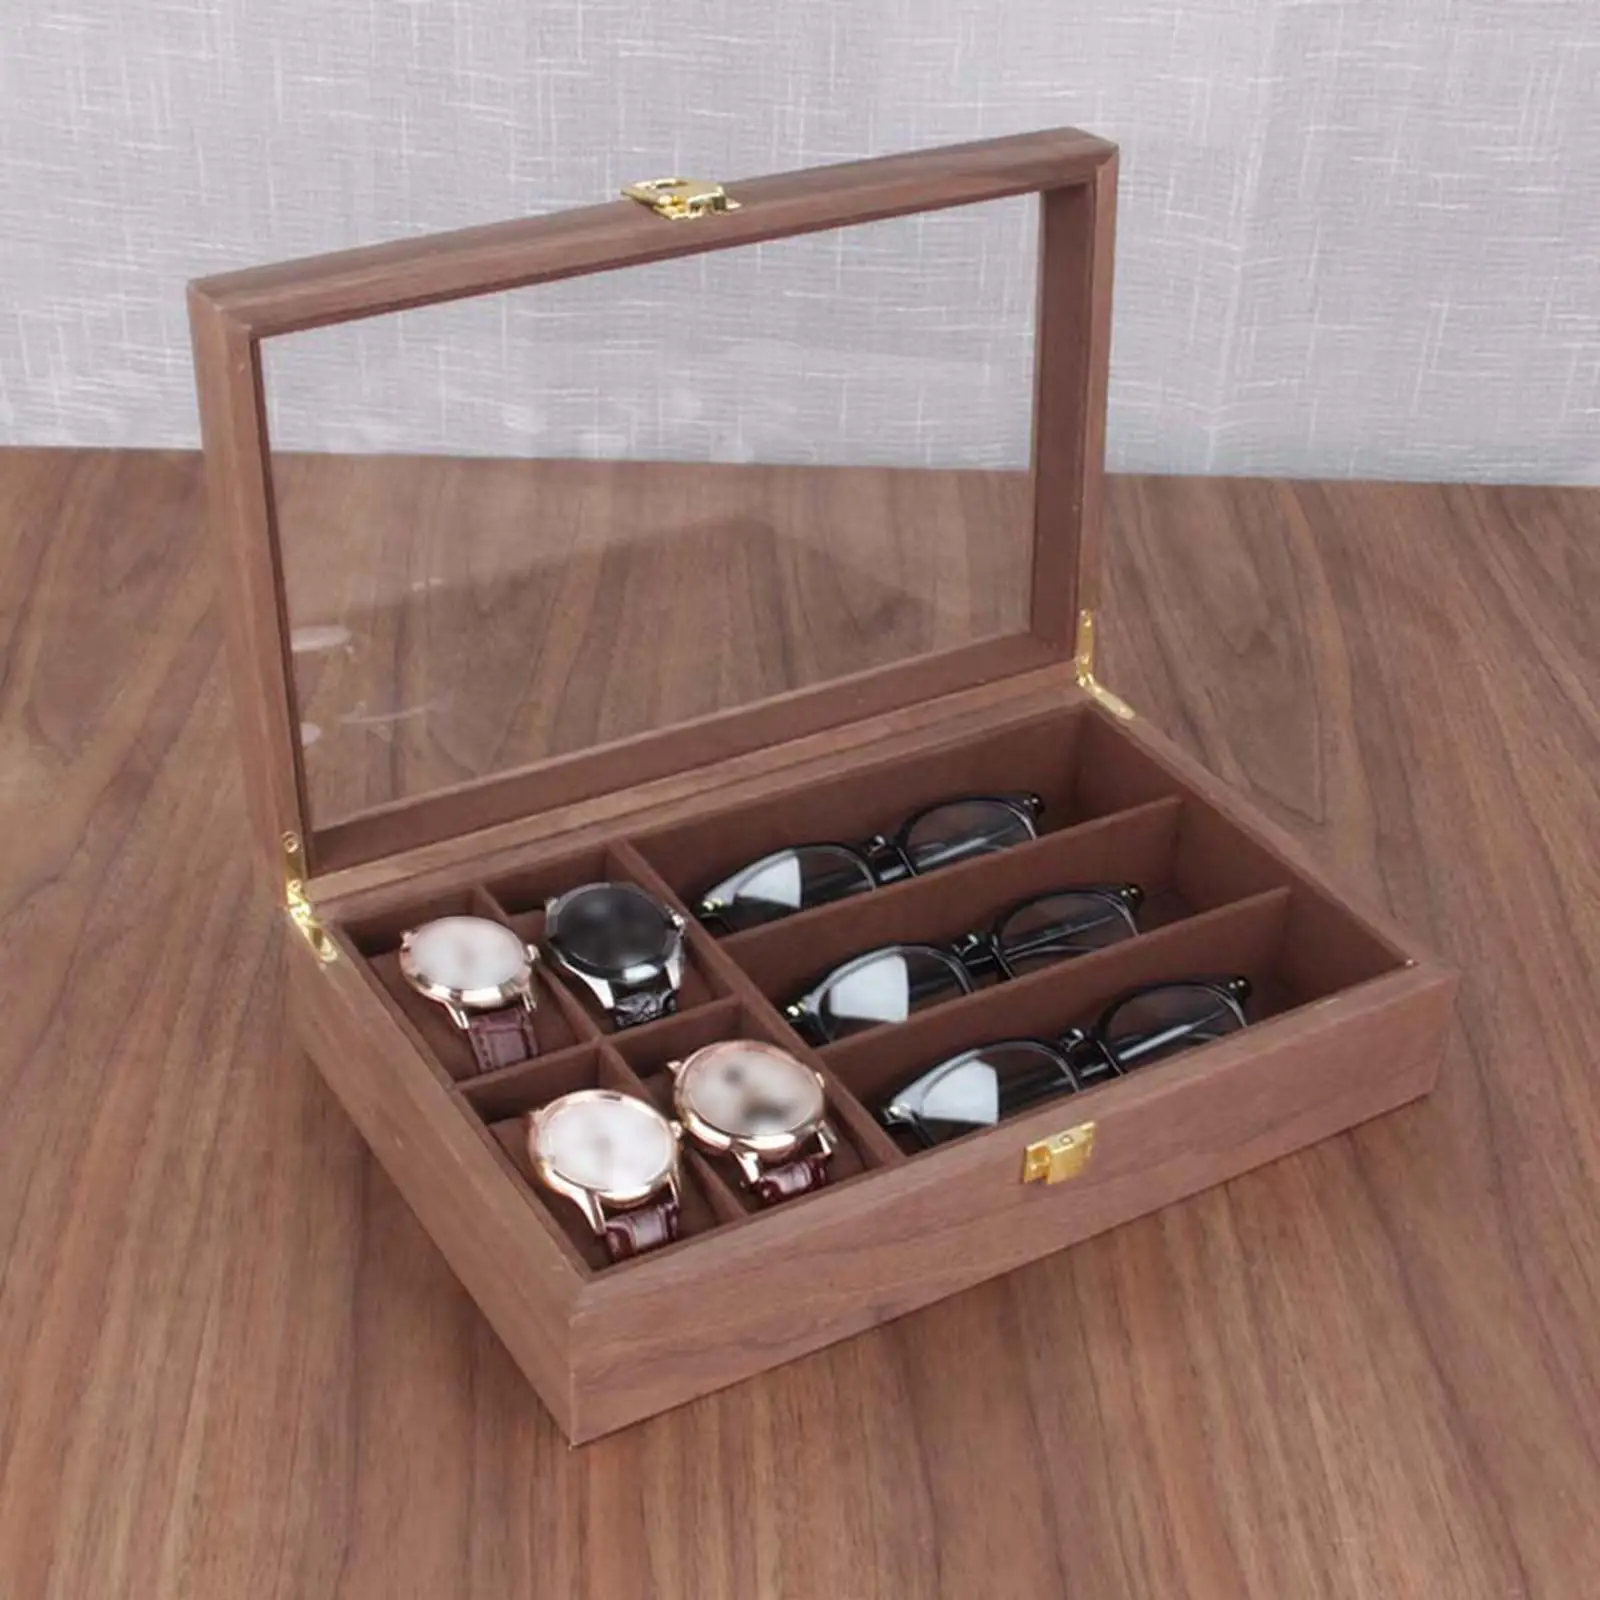 Wooden Watch Box 4 Watch Slots 3 Sunglasses Grids Portable Vintage Lockable with Clear Top Organizer Jewelry Storage Men Women